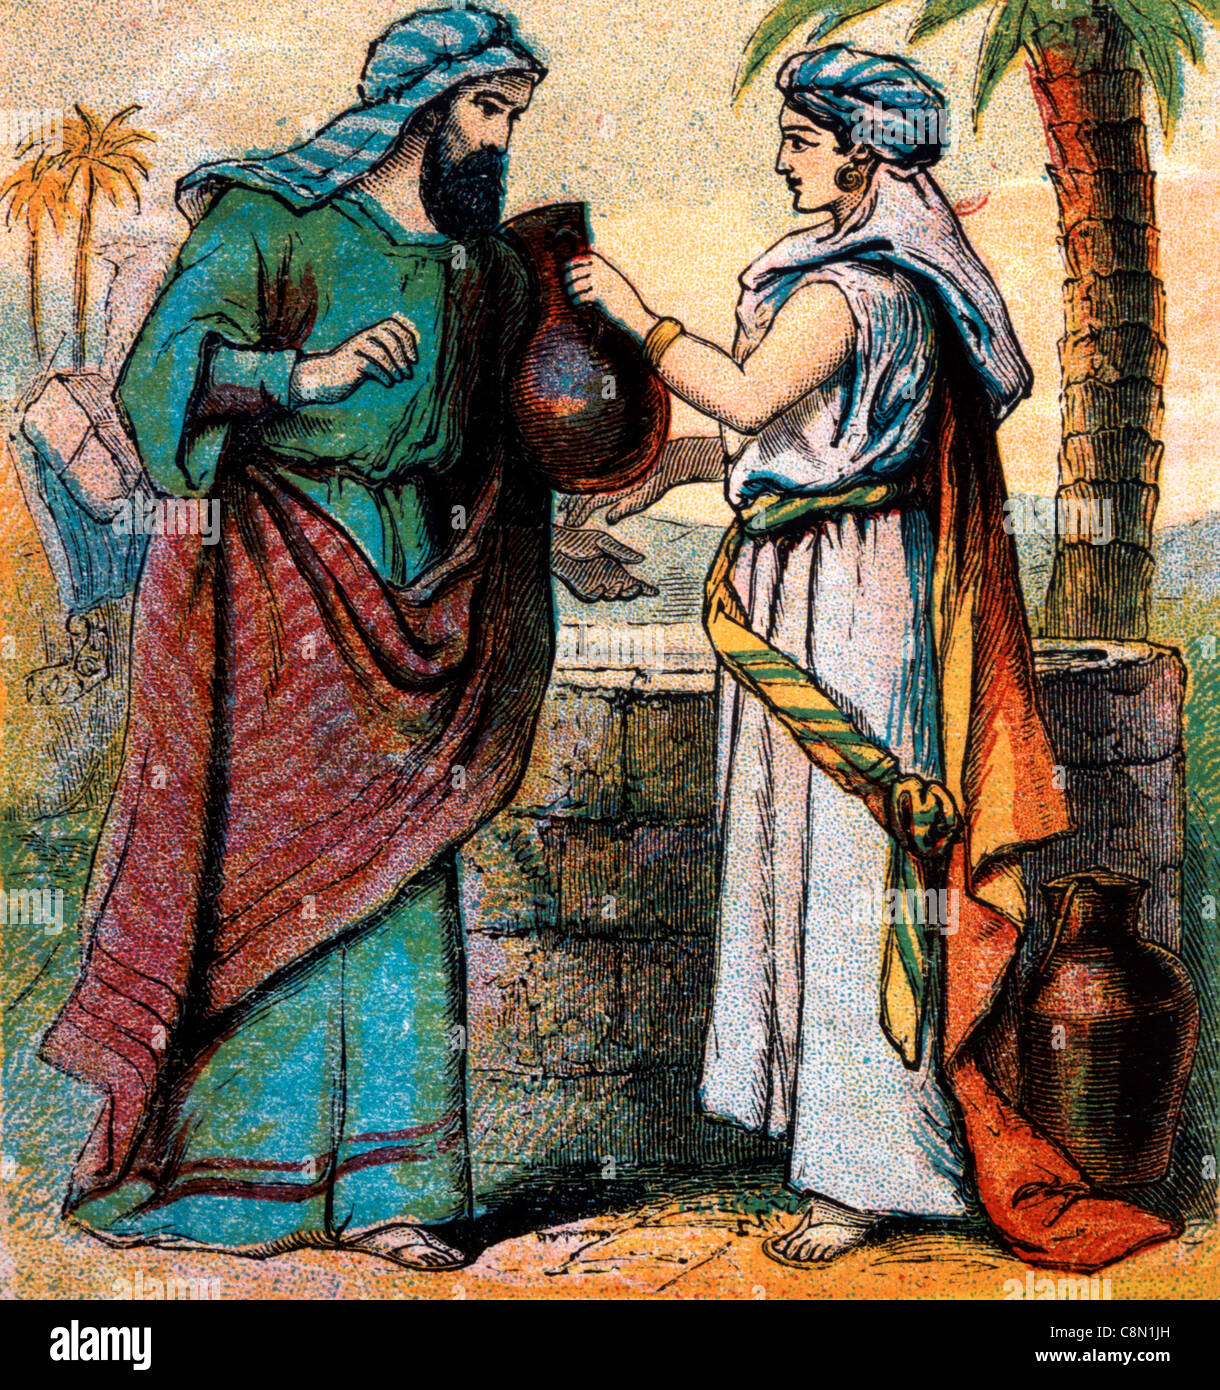 Bible Stories- Illustration Of Rebekah offering water to Abraham's servant Eliezer By The Well In The Story of Isaac Genesis xxiv 1-28 Stock Photo